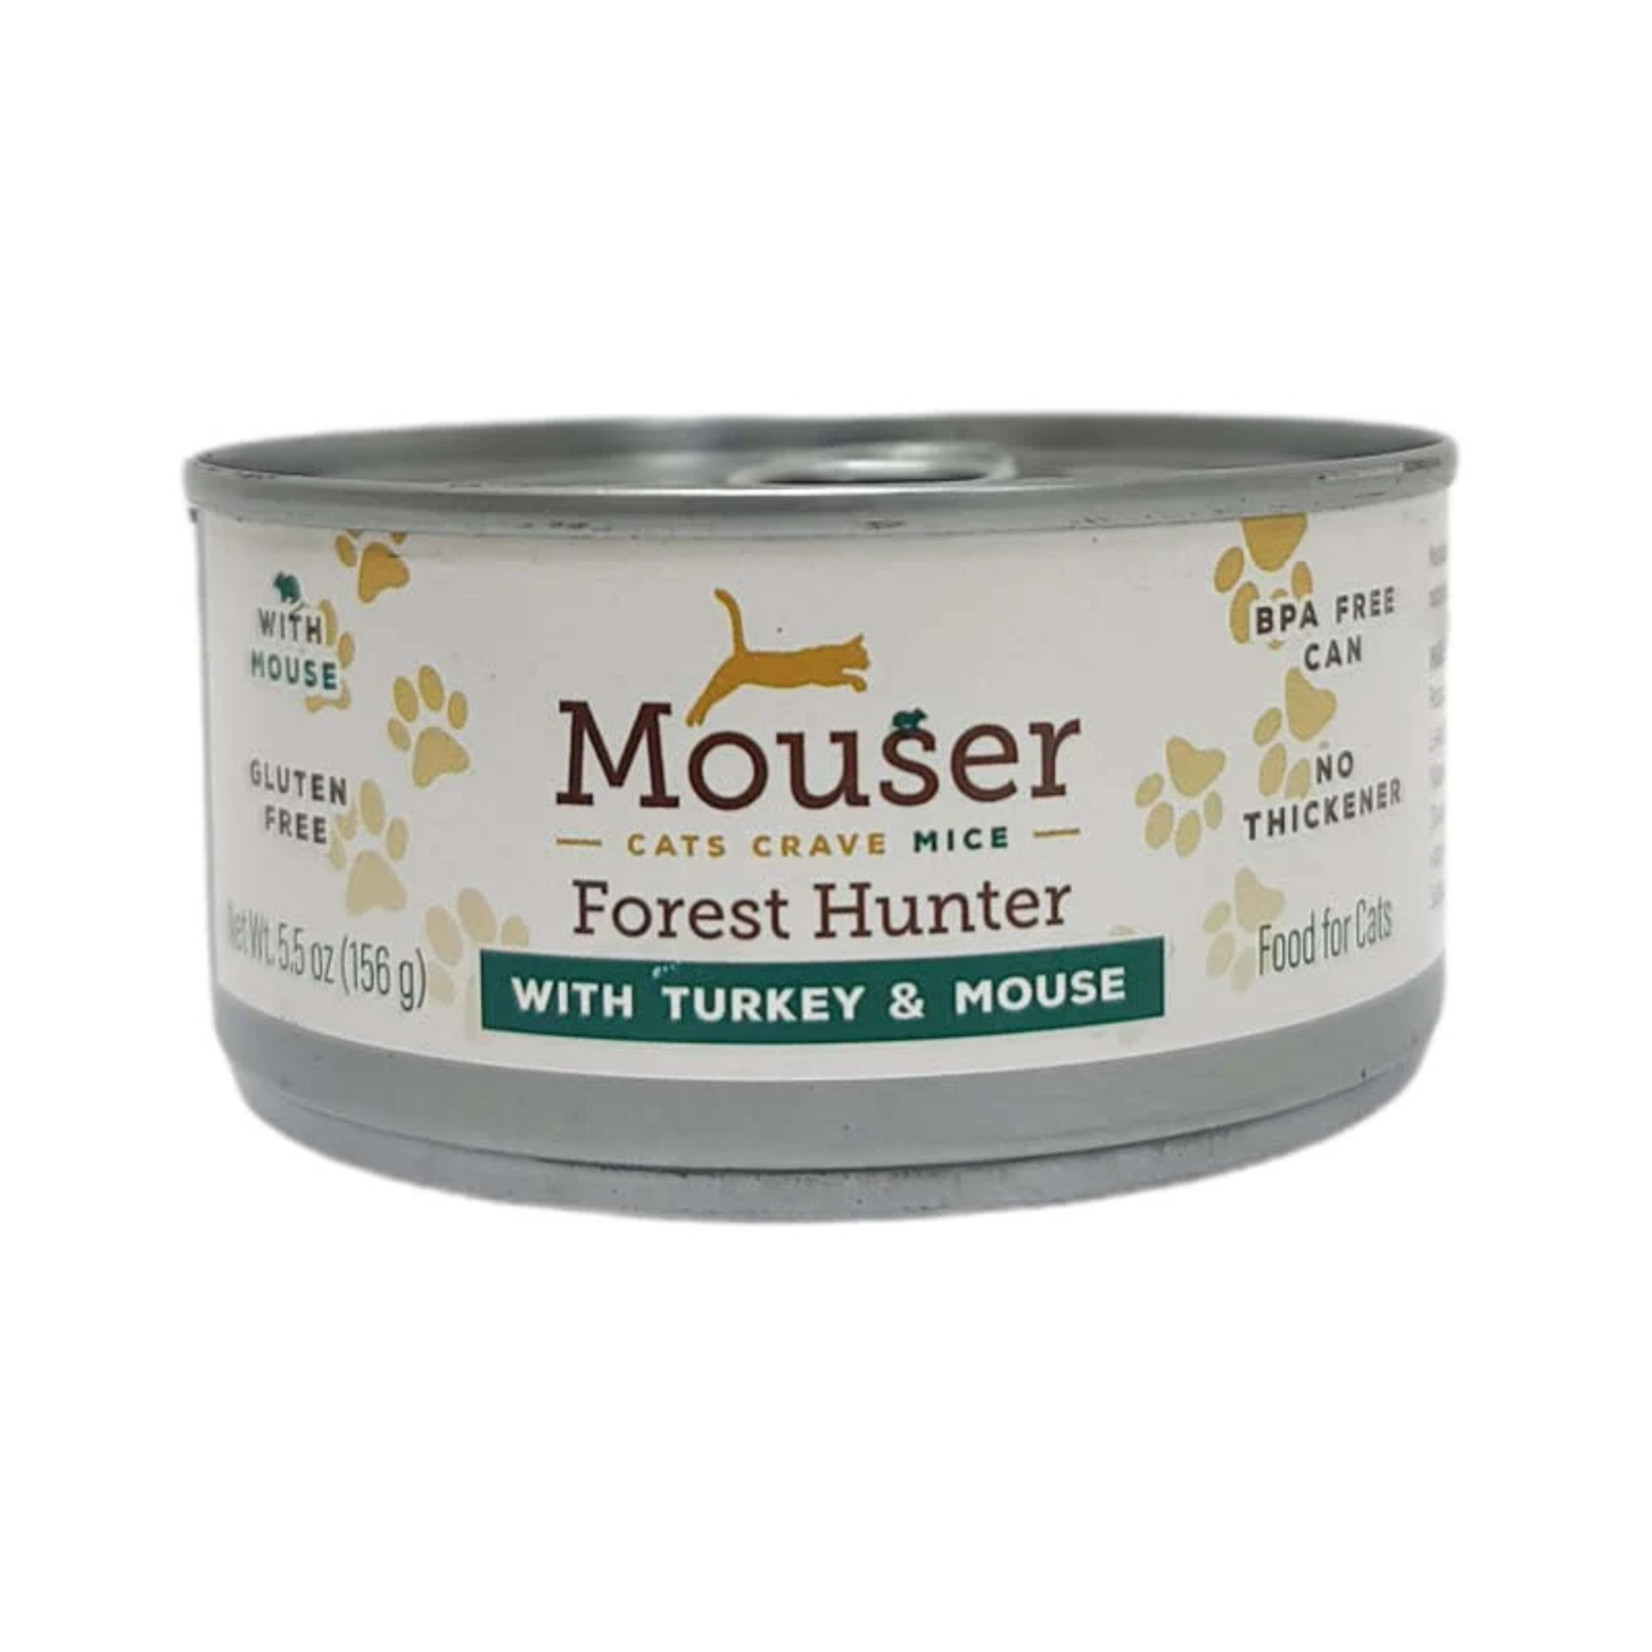 Mouser Mouser Forest Hunter Turkey & Mouse Food for Cats